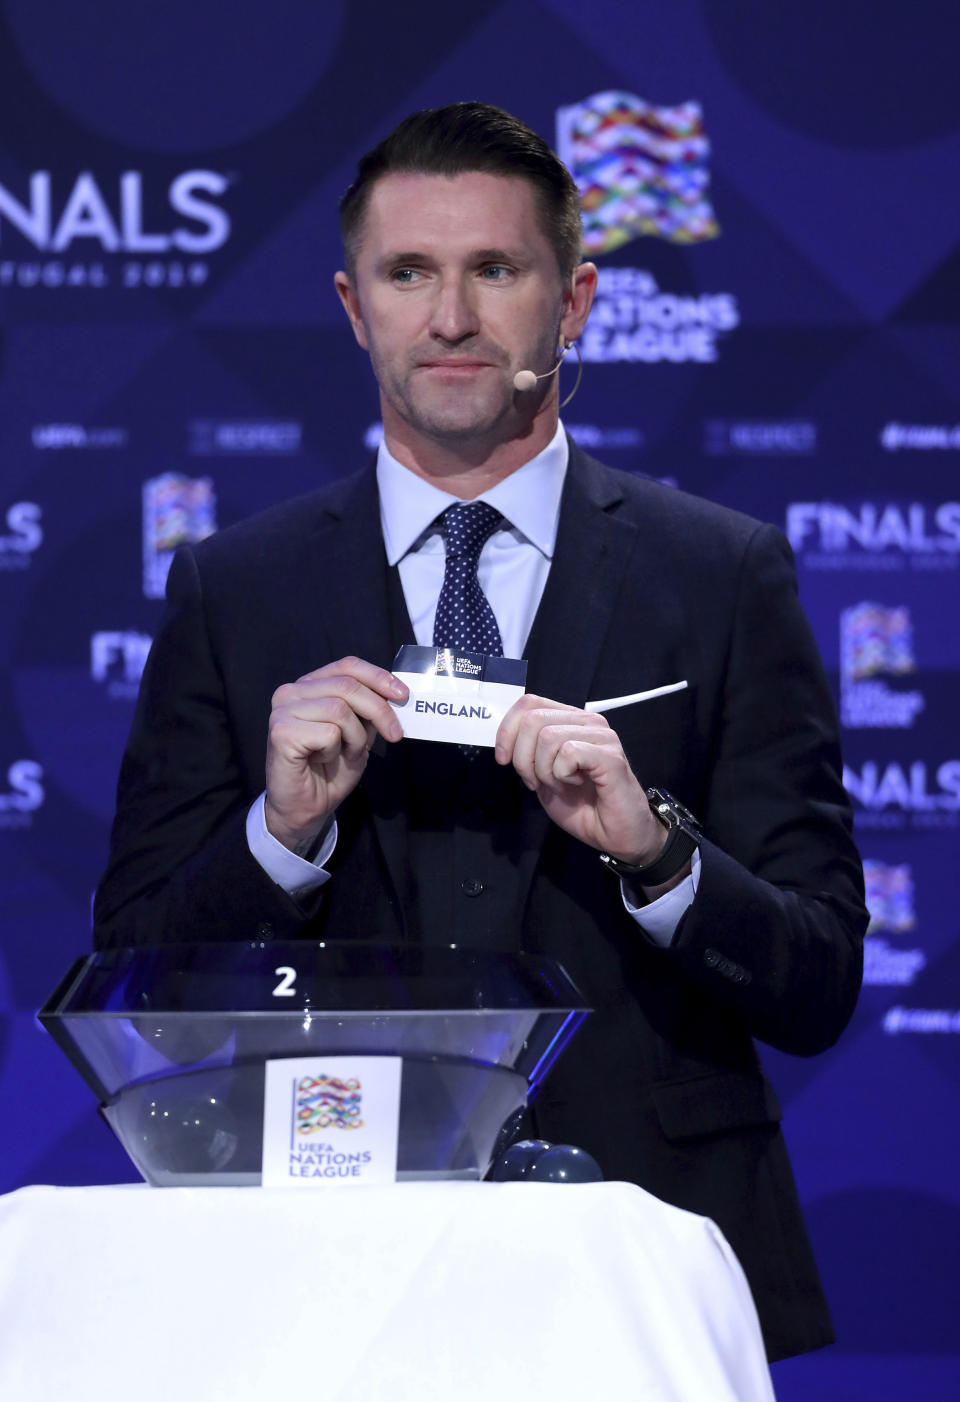 Robbie Keane presents the draw during the UEFA Nations League Finals draw at the Shelbourne Hotel, Dublin, Monday Dec. 3, 2018. (Niall Carson/PA via AP)